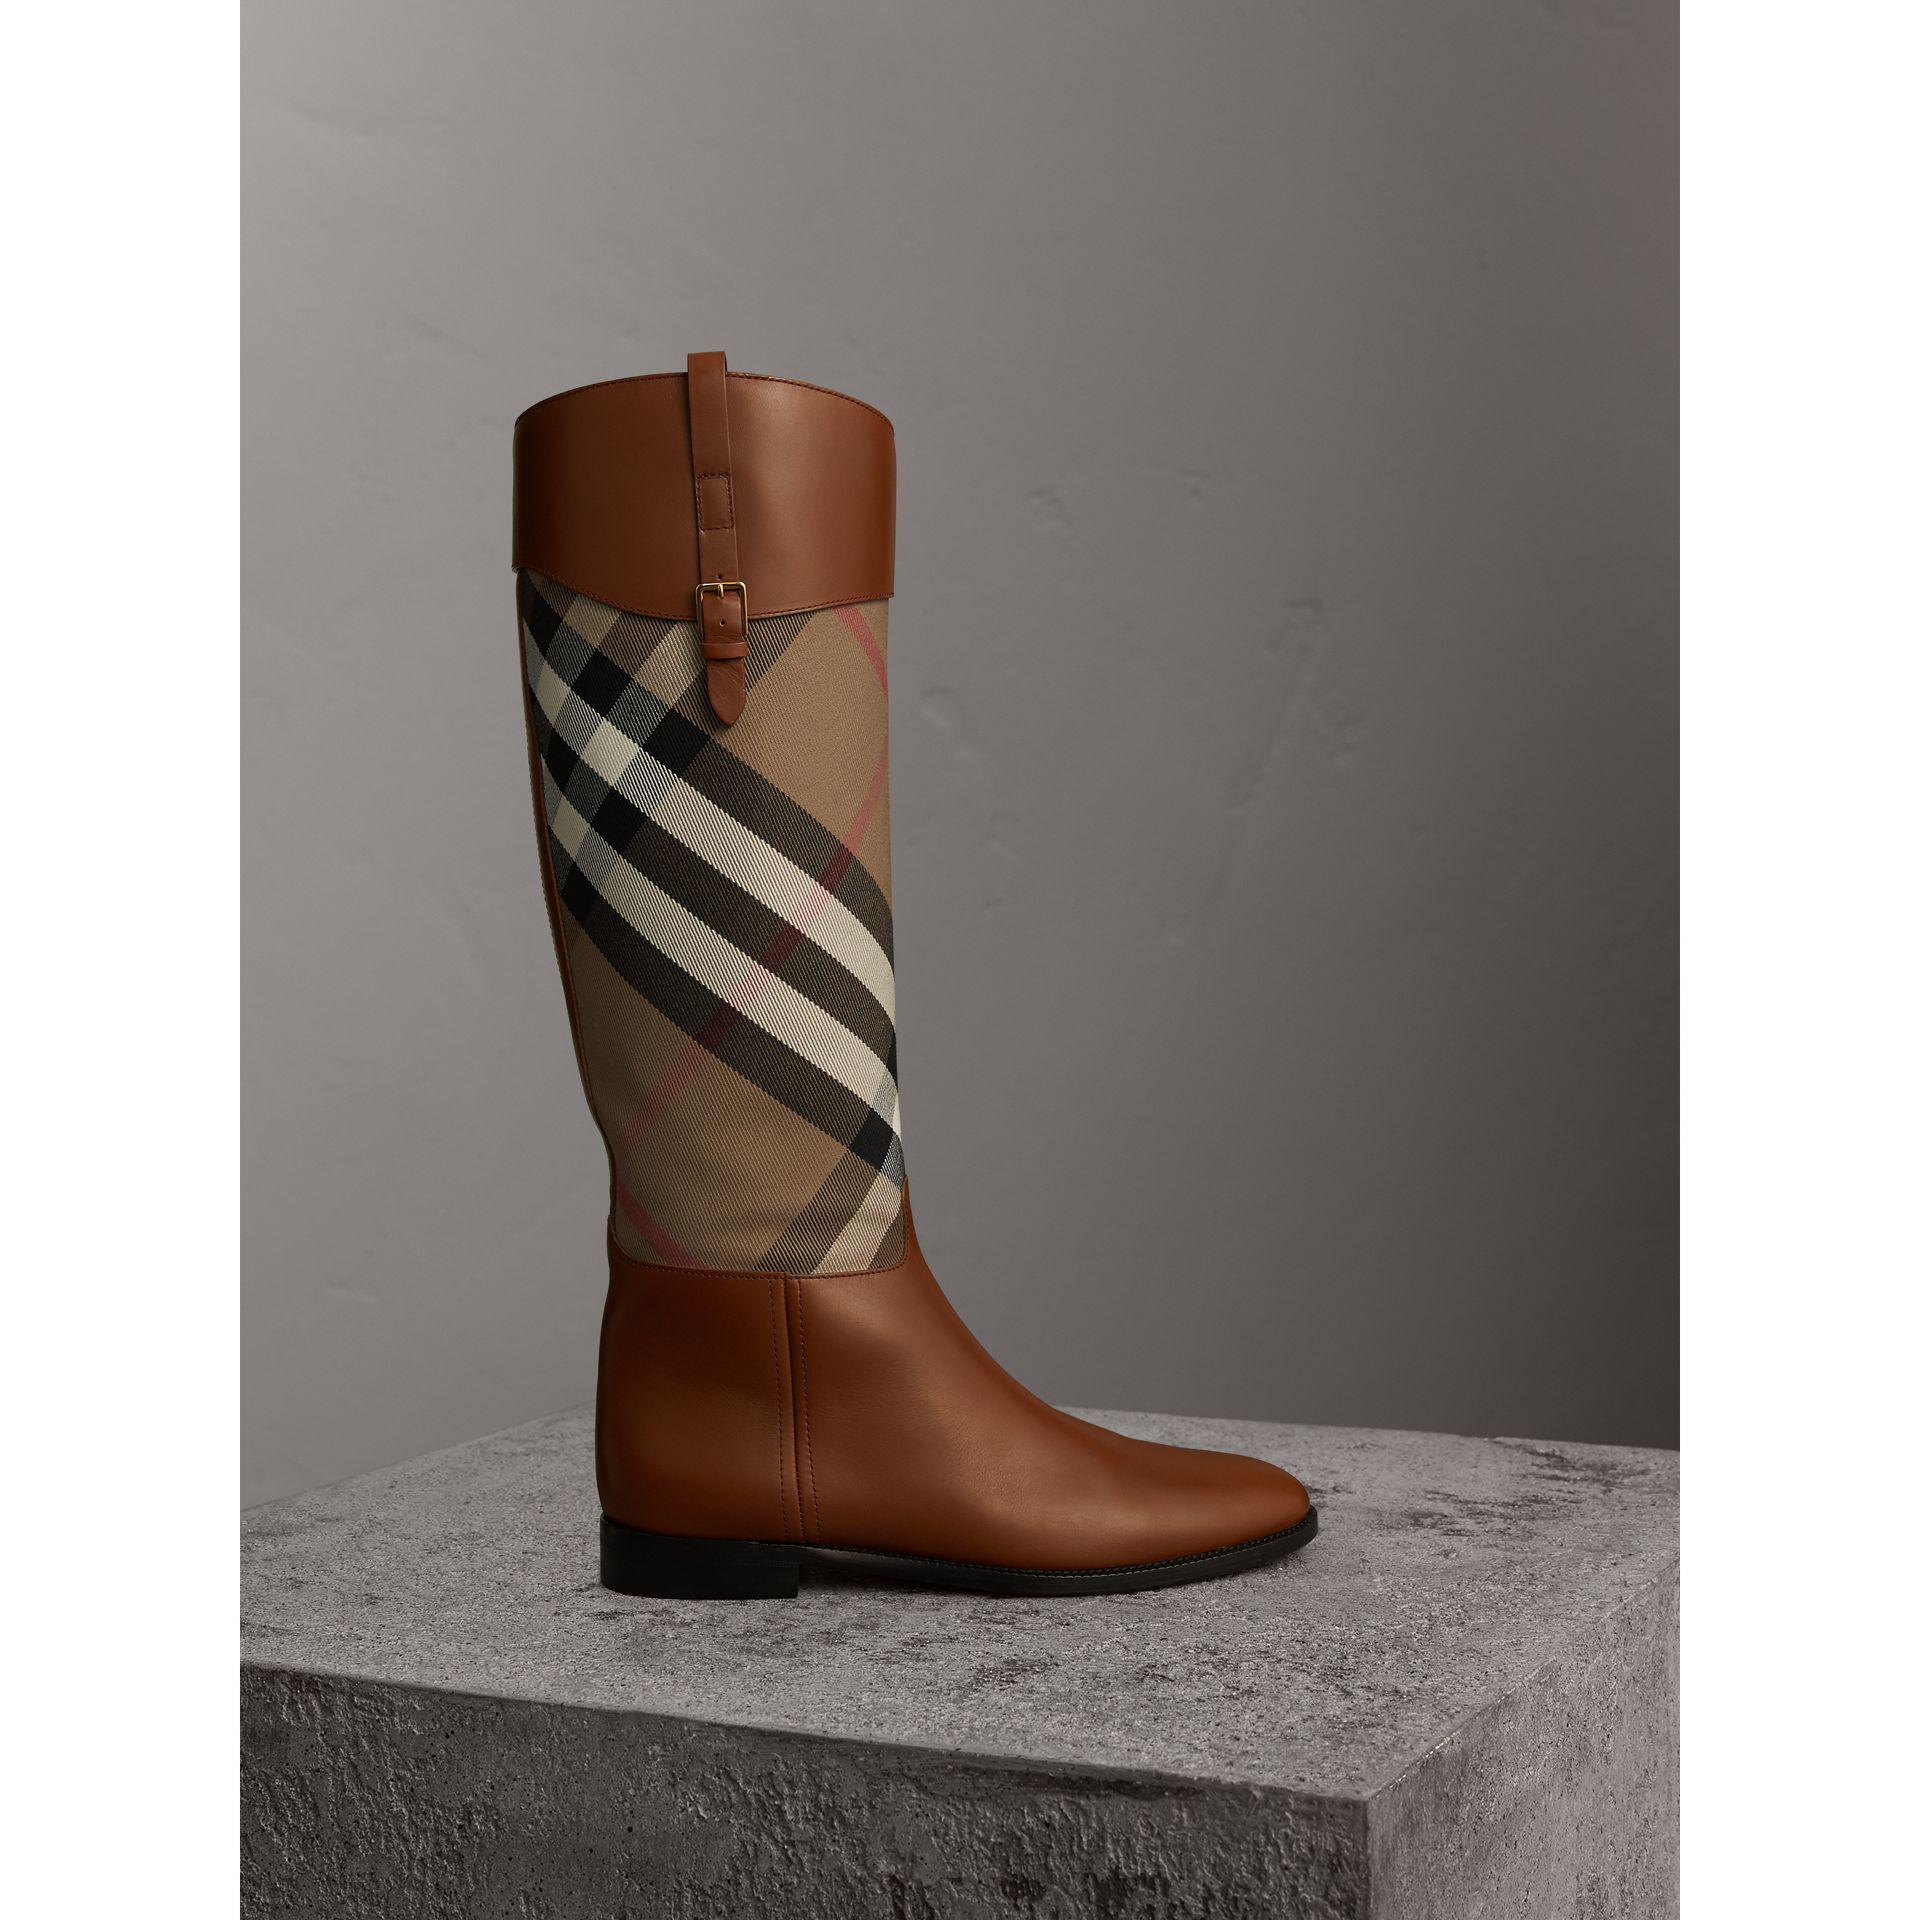 burberry leather riding boots